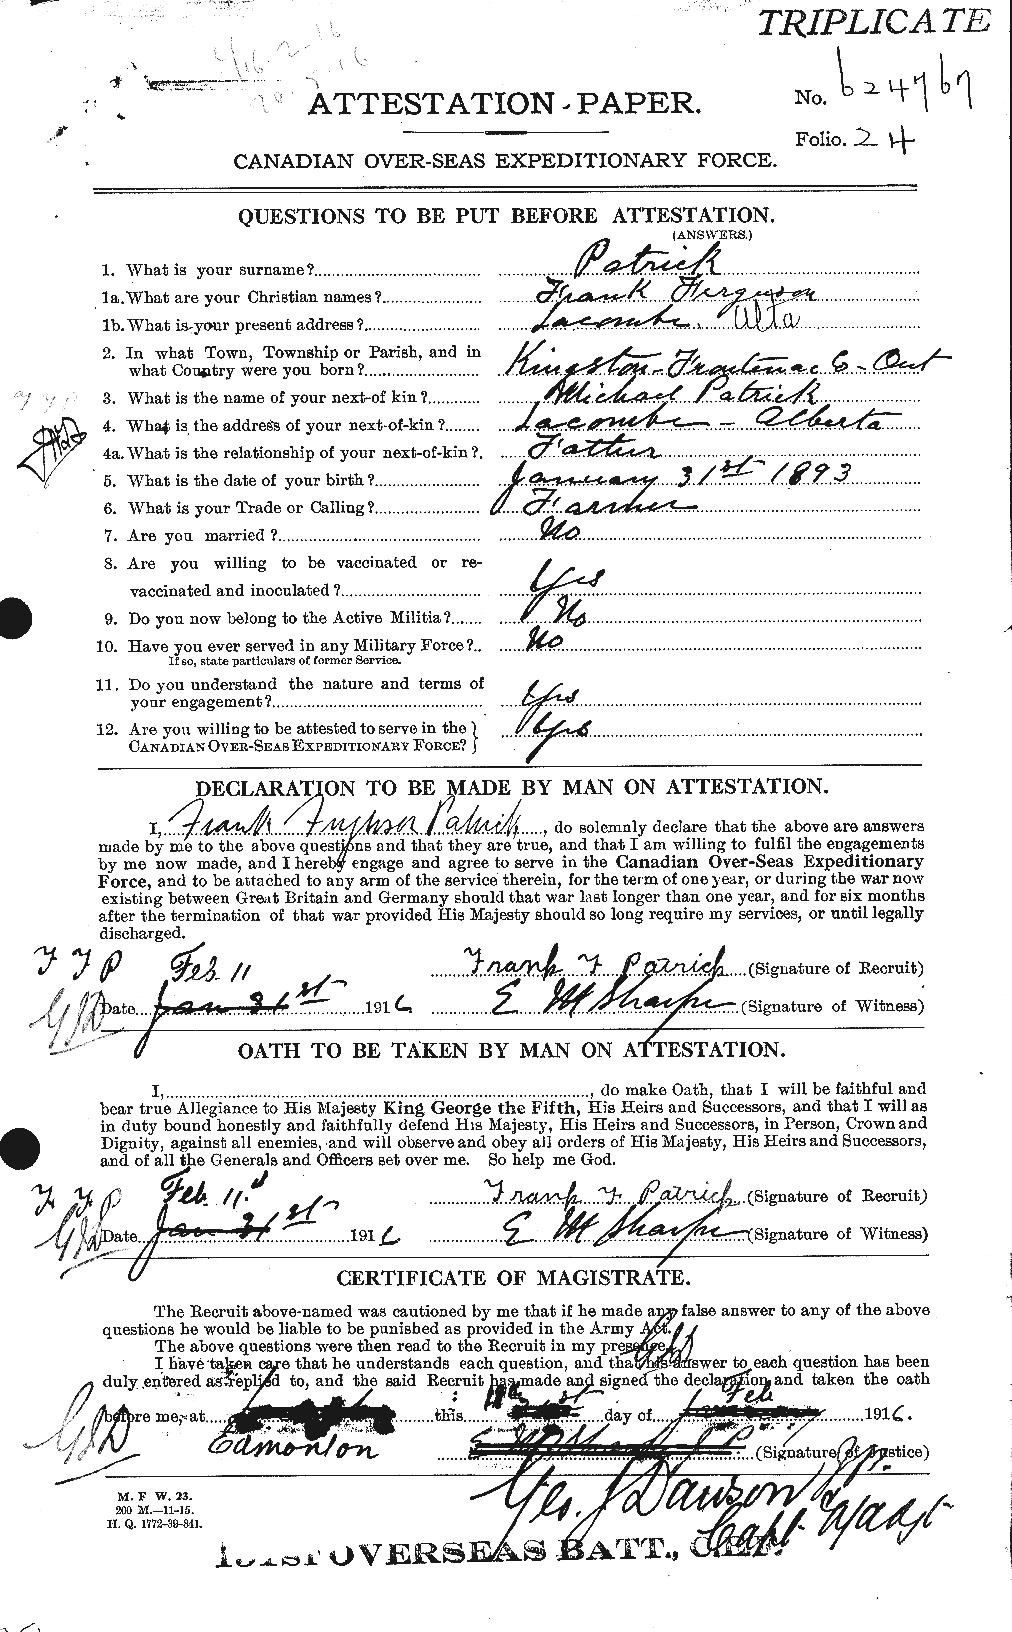 Personnel Records of the First World War - CEF 568008a